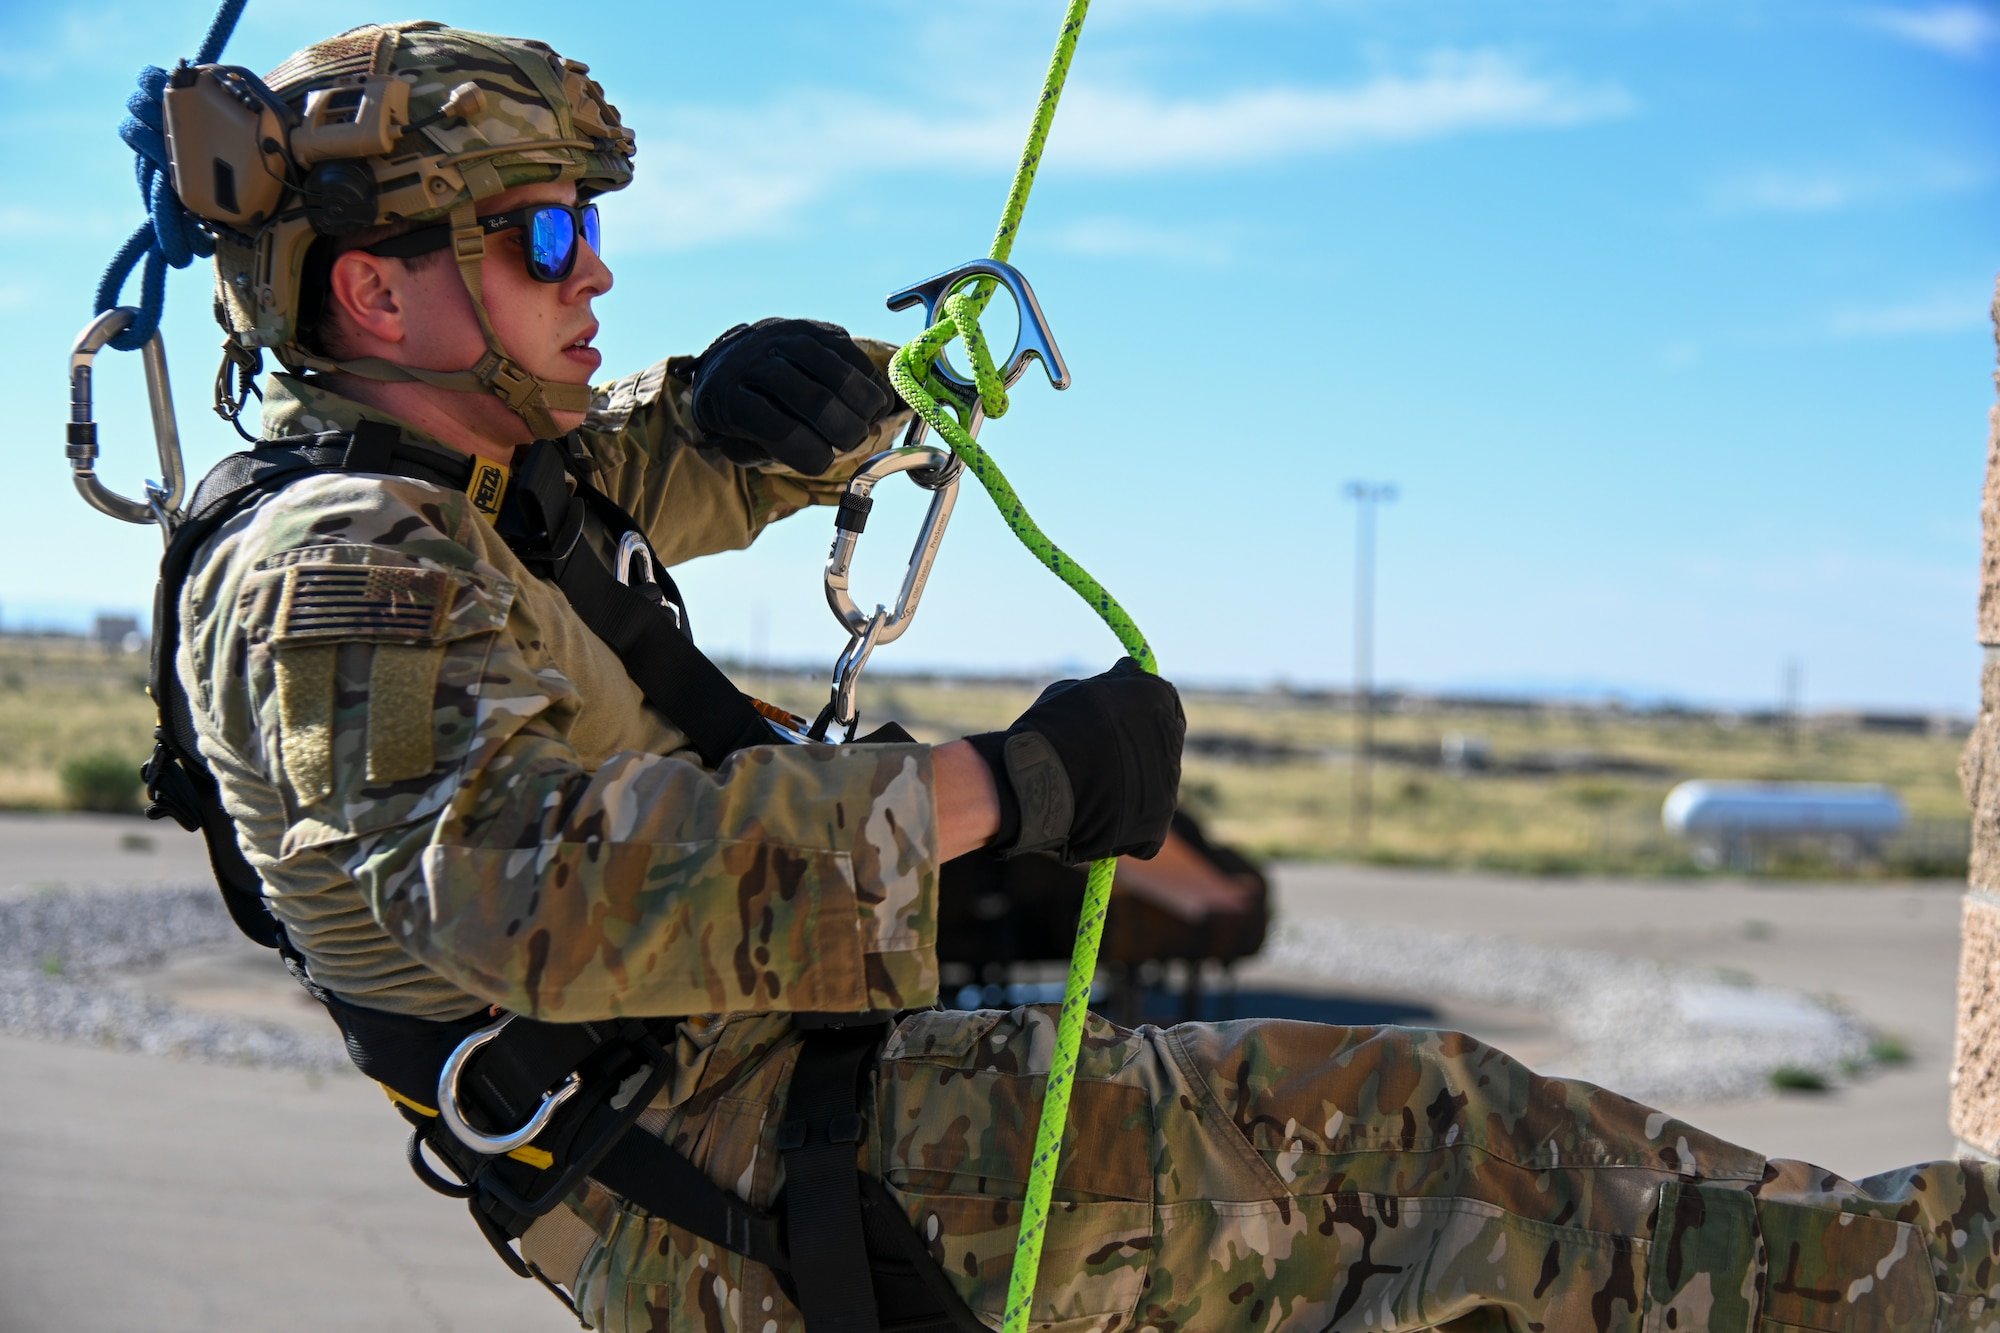 Staff Sgt. Steven Chaney, 49th Security Forces Squadron patrolman, adjusts his rope length during the 49th Wing’s first rappel skills training, Oct. 5, 2021, on Holloman Air Force Base, New Mexico. Holloman defenders and firefighters learned about different ropes and knots to use to rappel in hostile or dangerous situations. (U.S. Air Force photo by Airman 1st Class Jessica Sanchez-Chen)